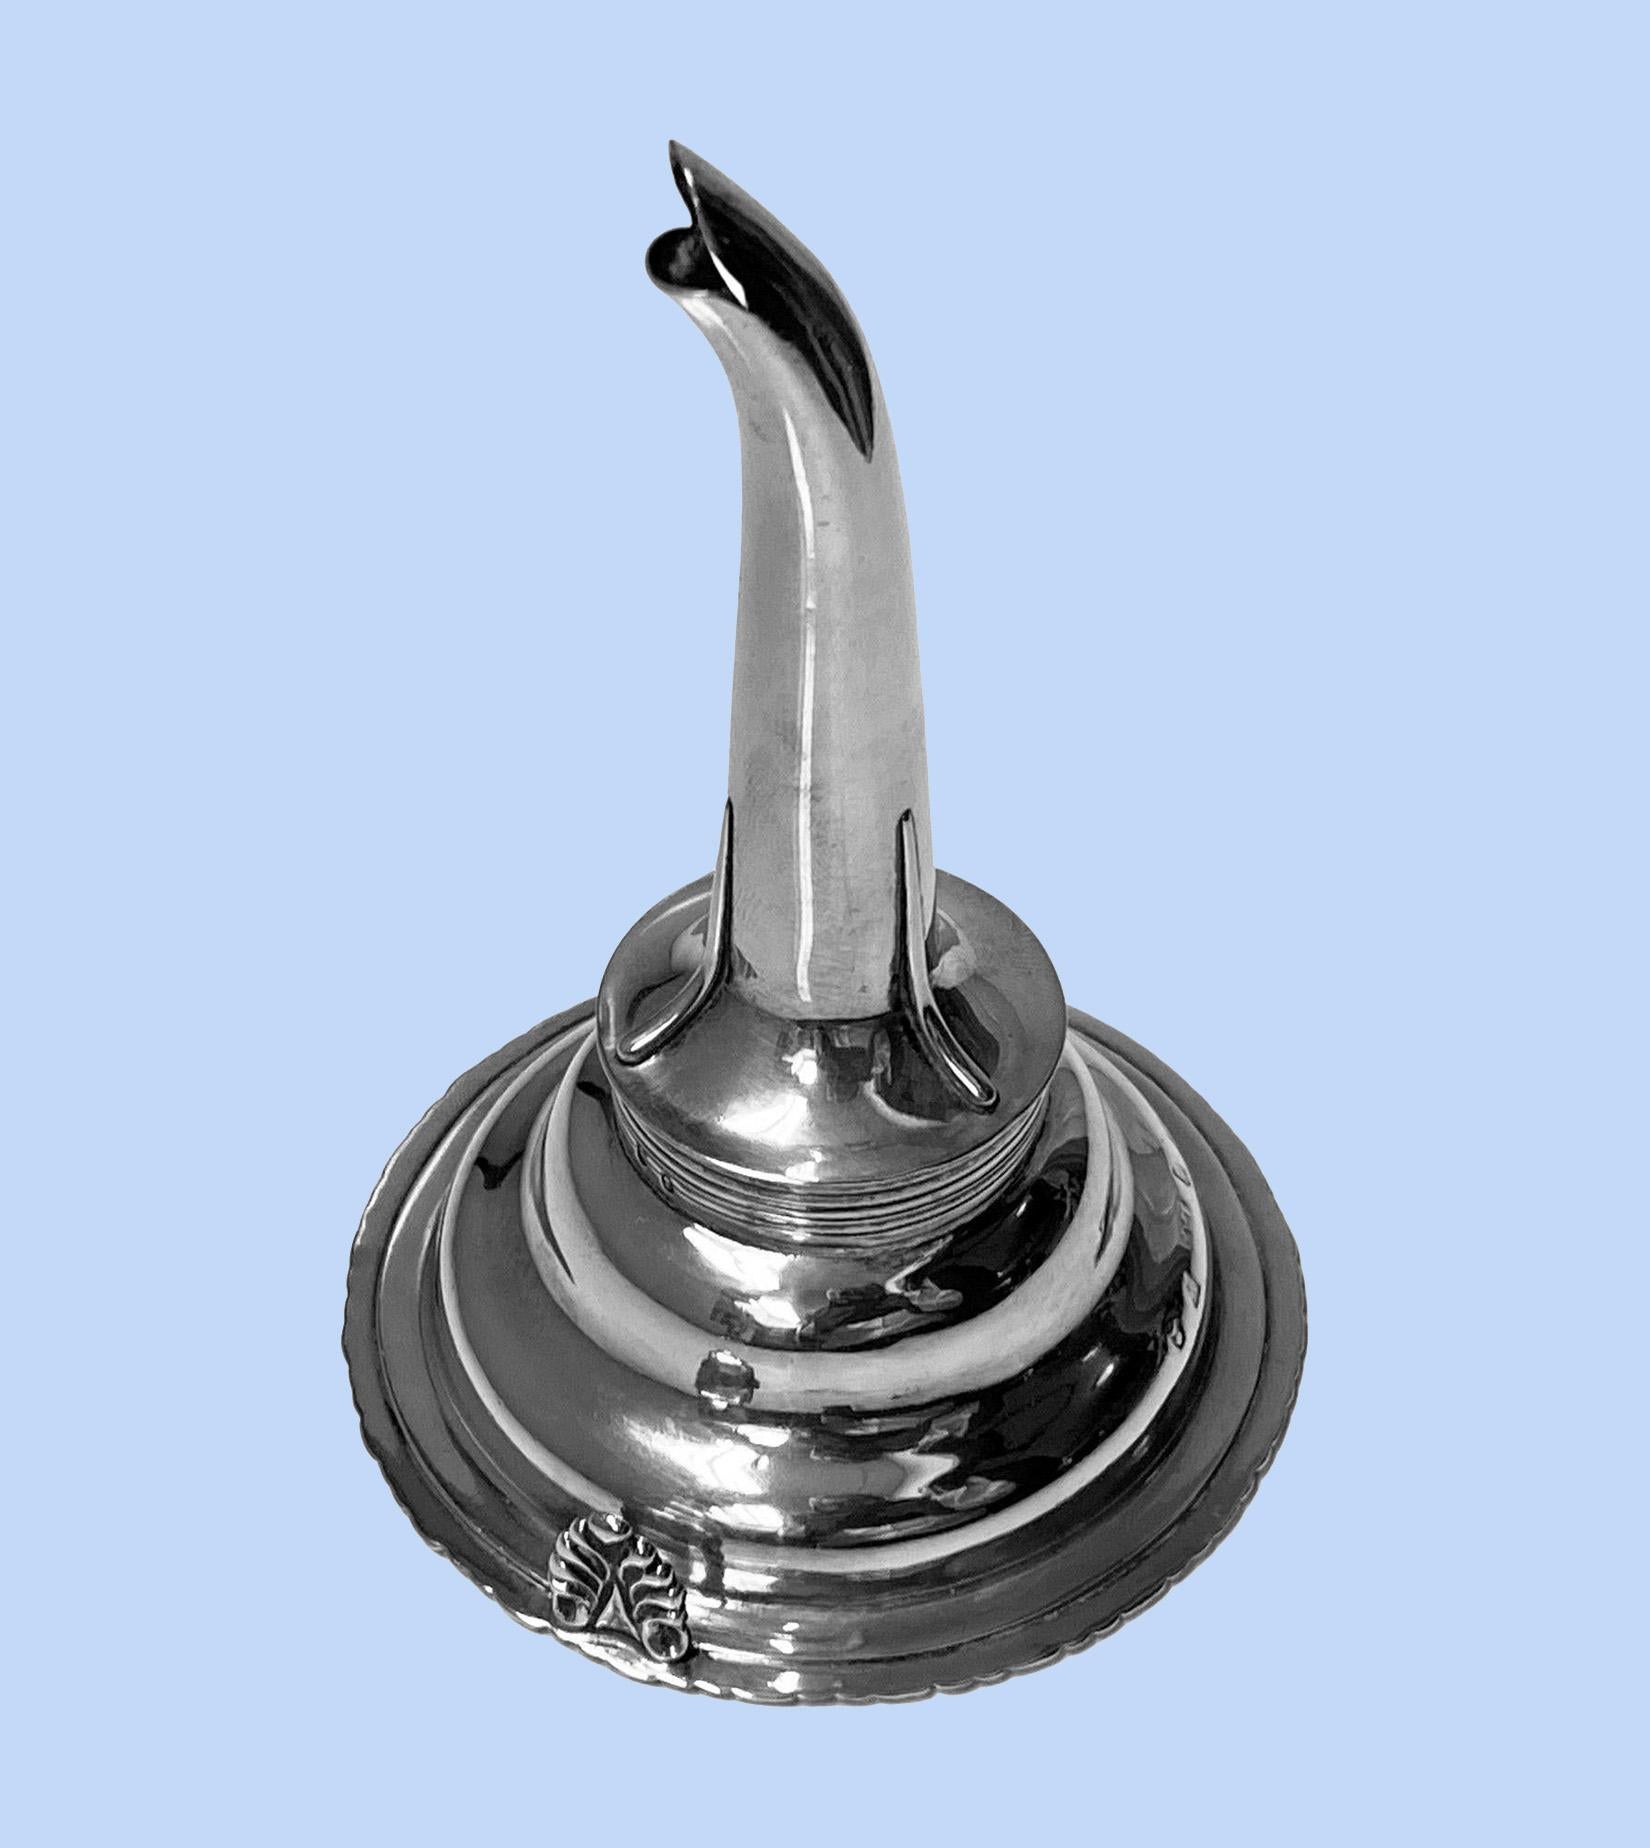 Antique Scottish silver wine funnel Edinburgh 1830 Leonard Urquhart. The Funnel of typical form, the base with anthemion surround and anthemion clip hook, plain body and upper strapped funnel. Marked on body and funnel. Height: 5 1/8 inches. Weight: